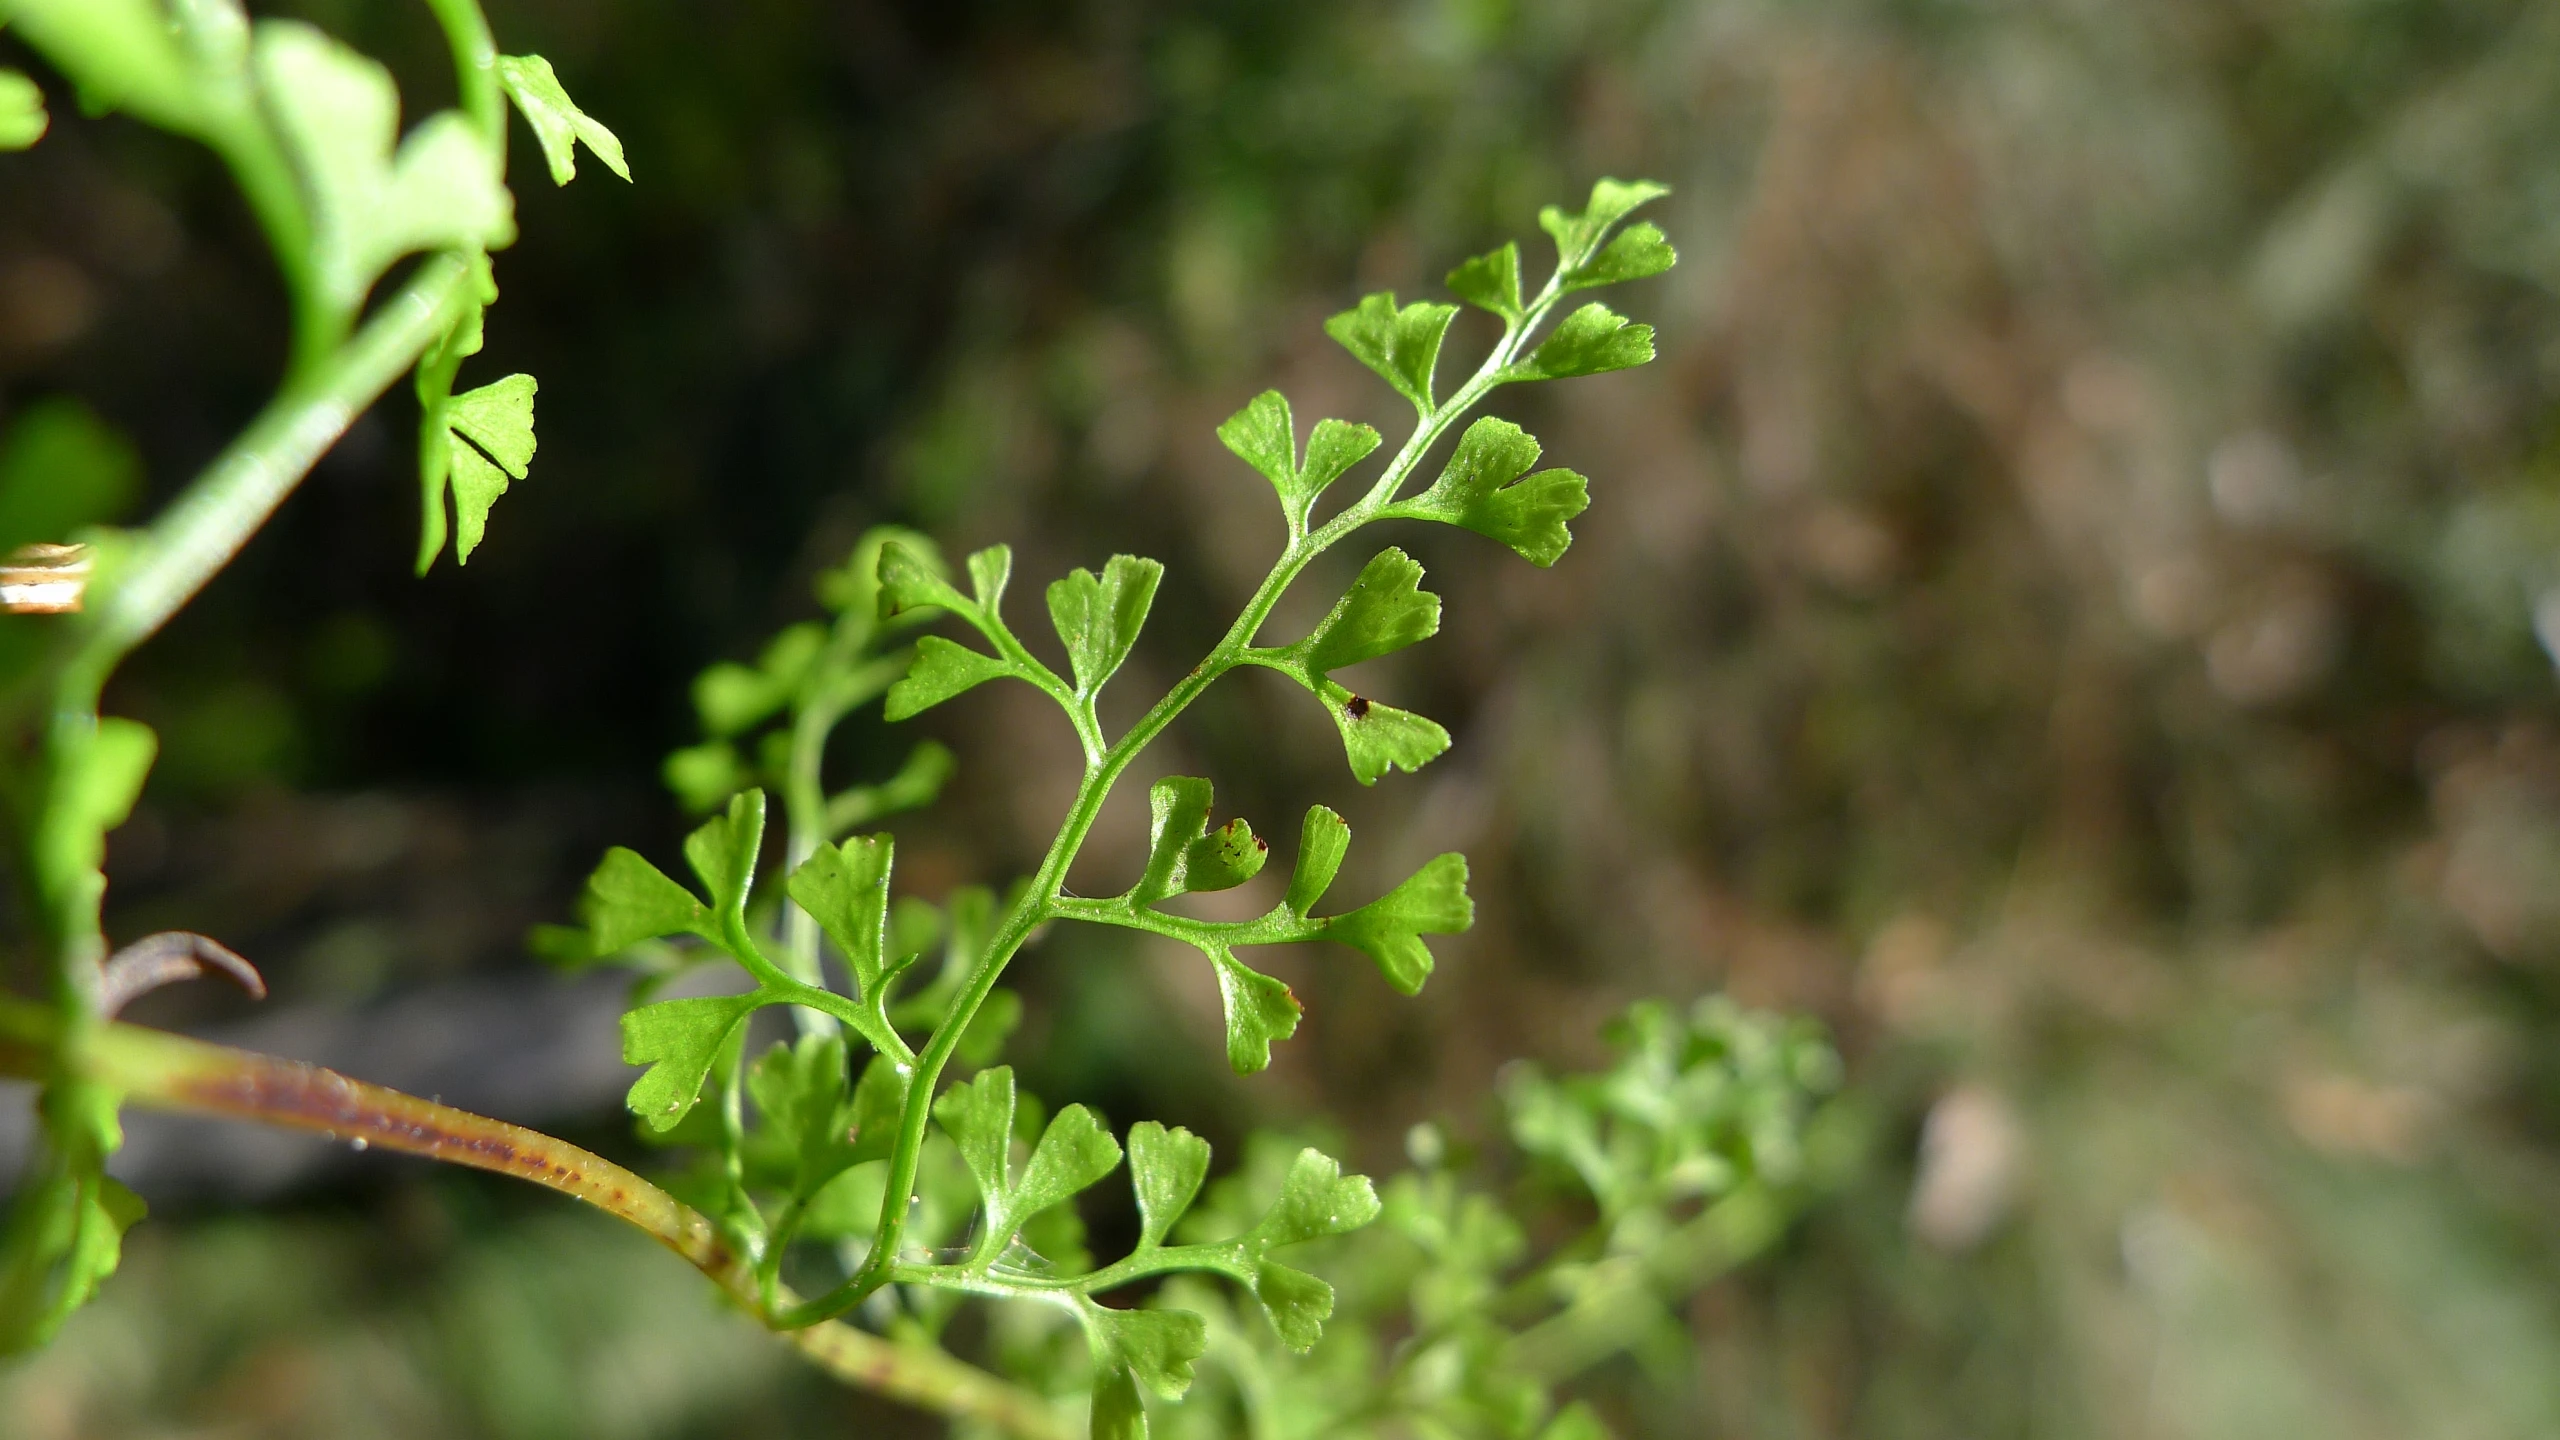 a close - up of a green plant is shown